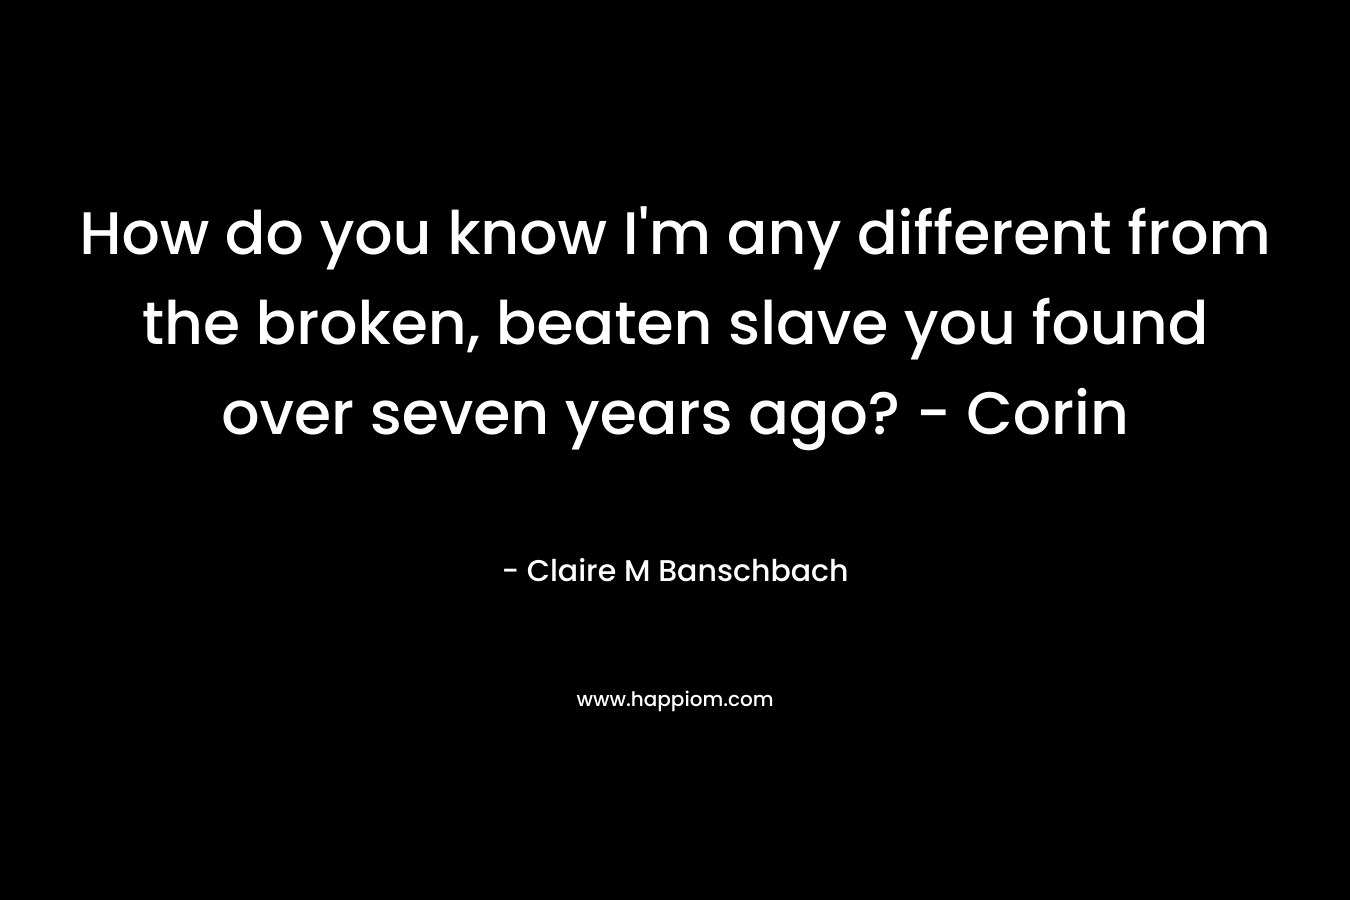 How do you know I'm any different from the broken, beaten slave you found over seven years ago? - Corin